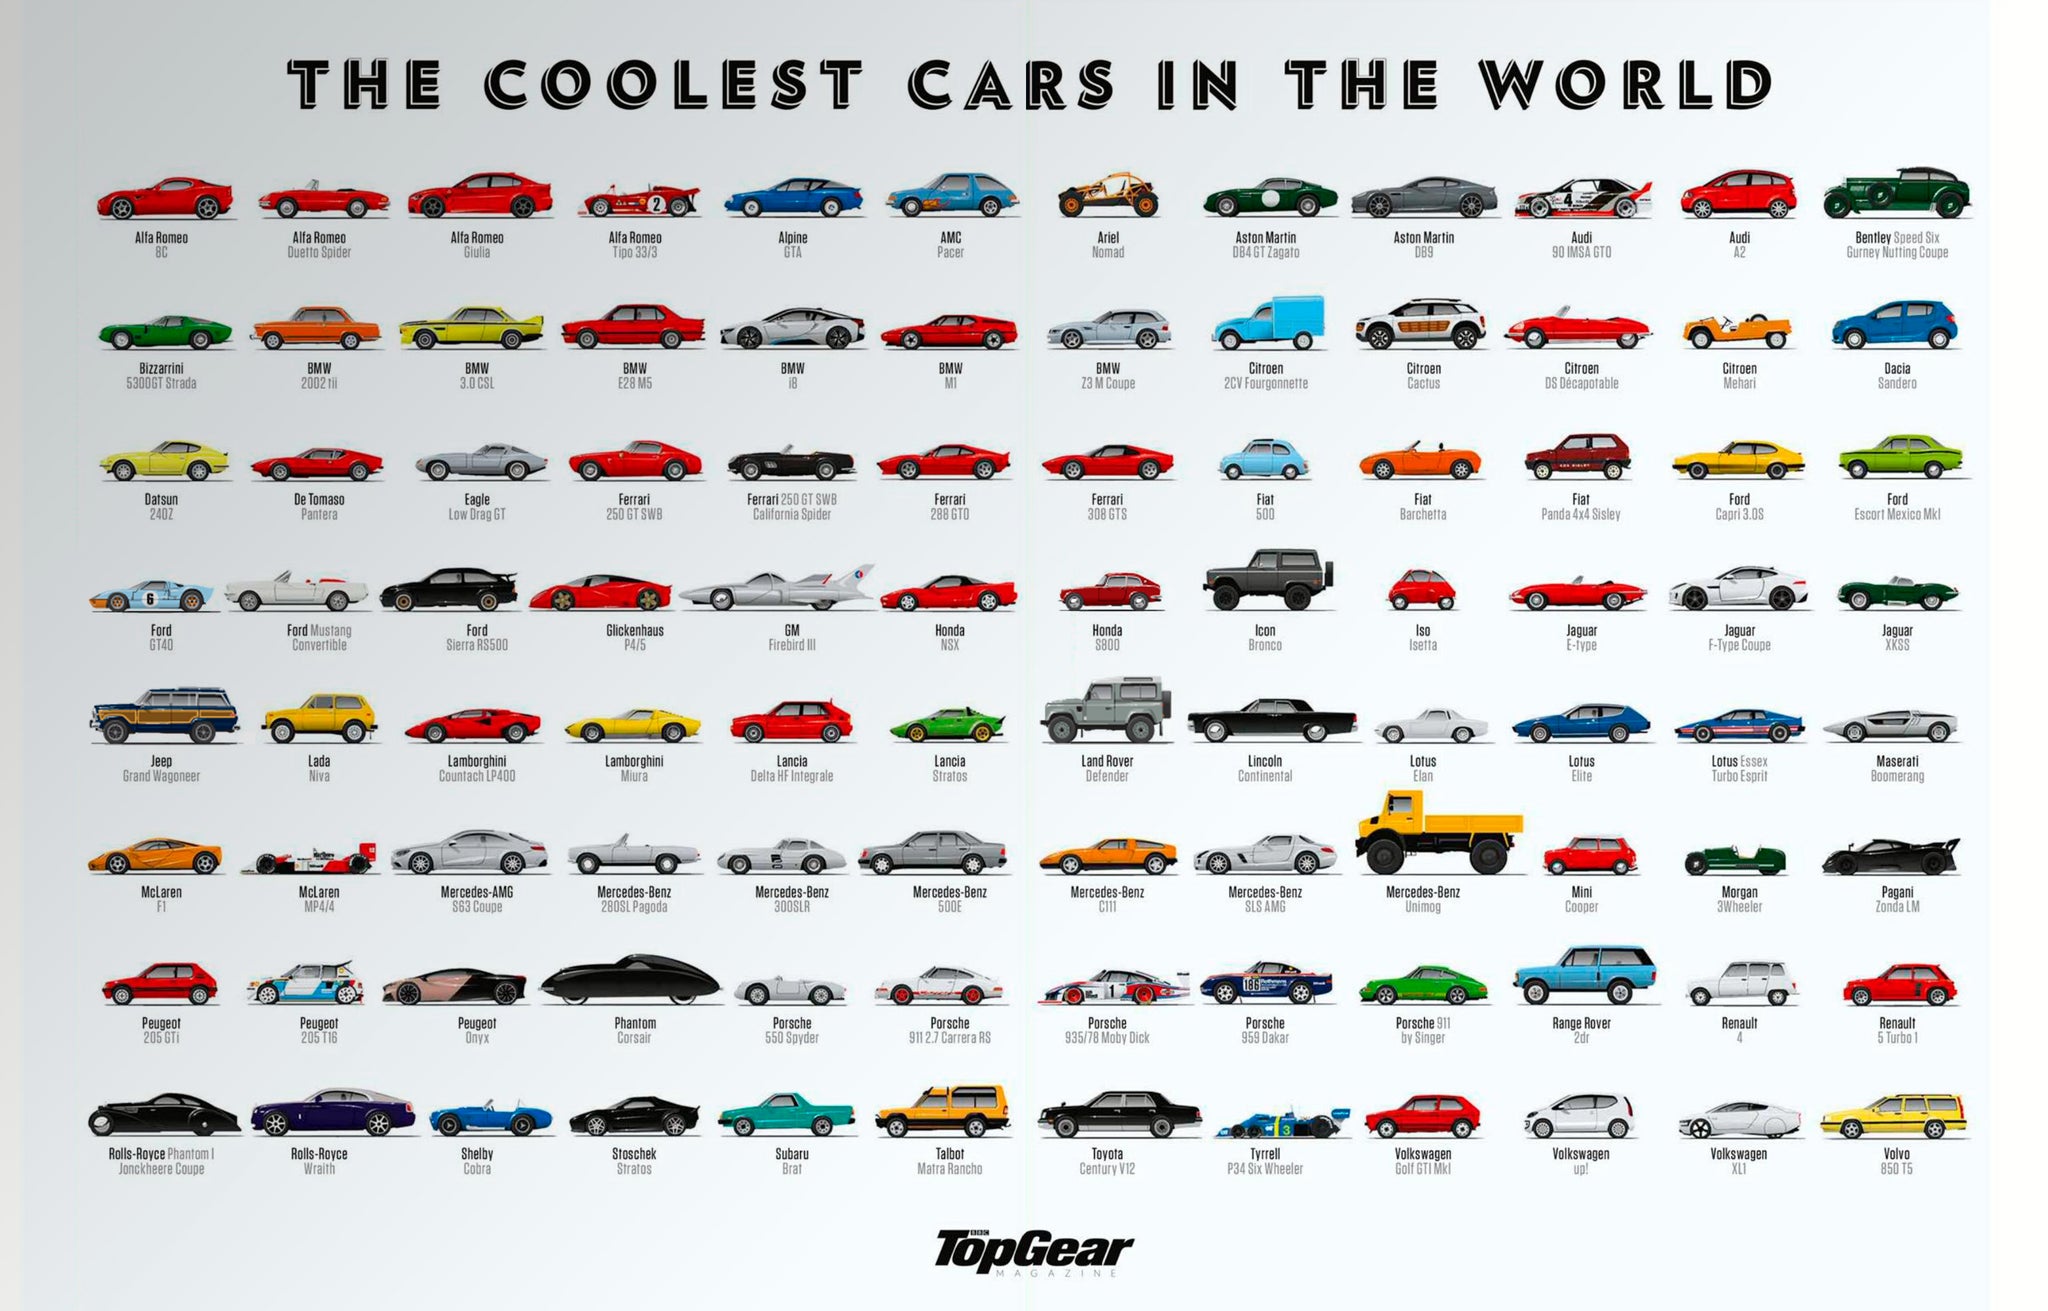 The Coolest Cars in the World poster